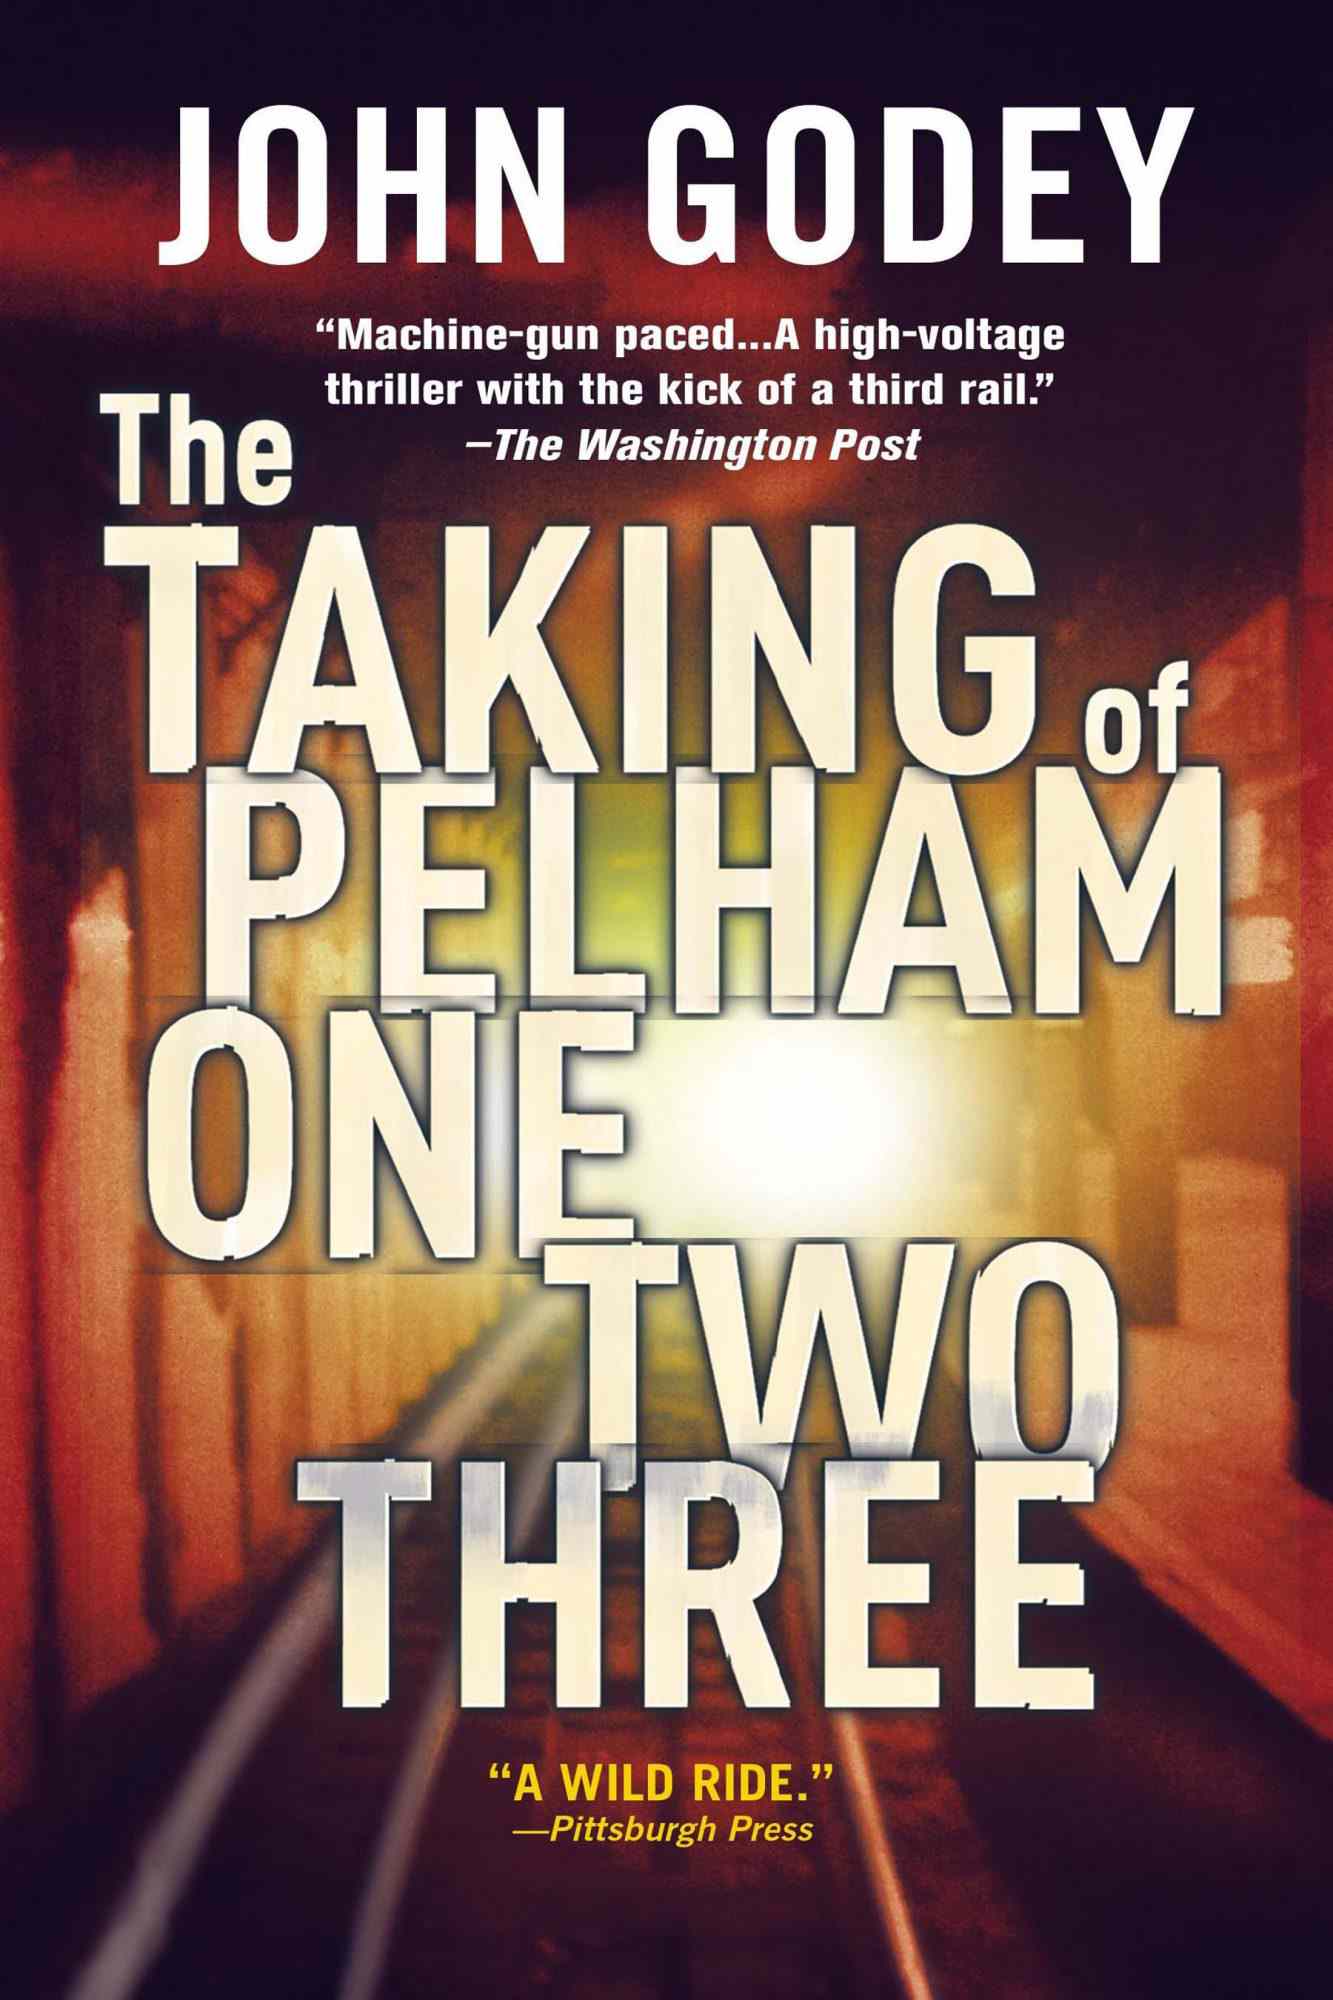 The Taking of Pelham One Two Three by John Godey (1973)